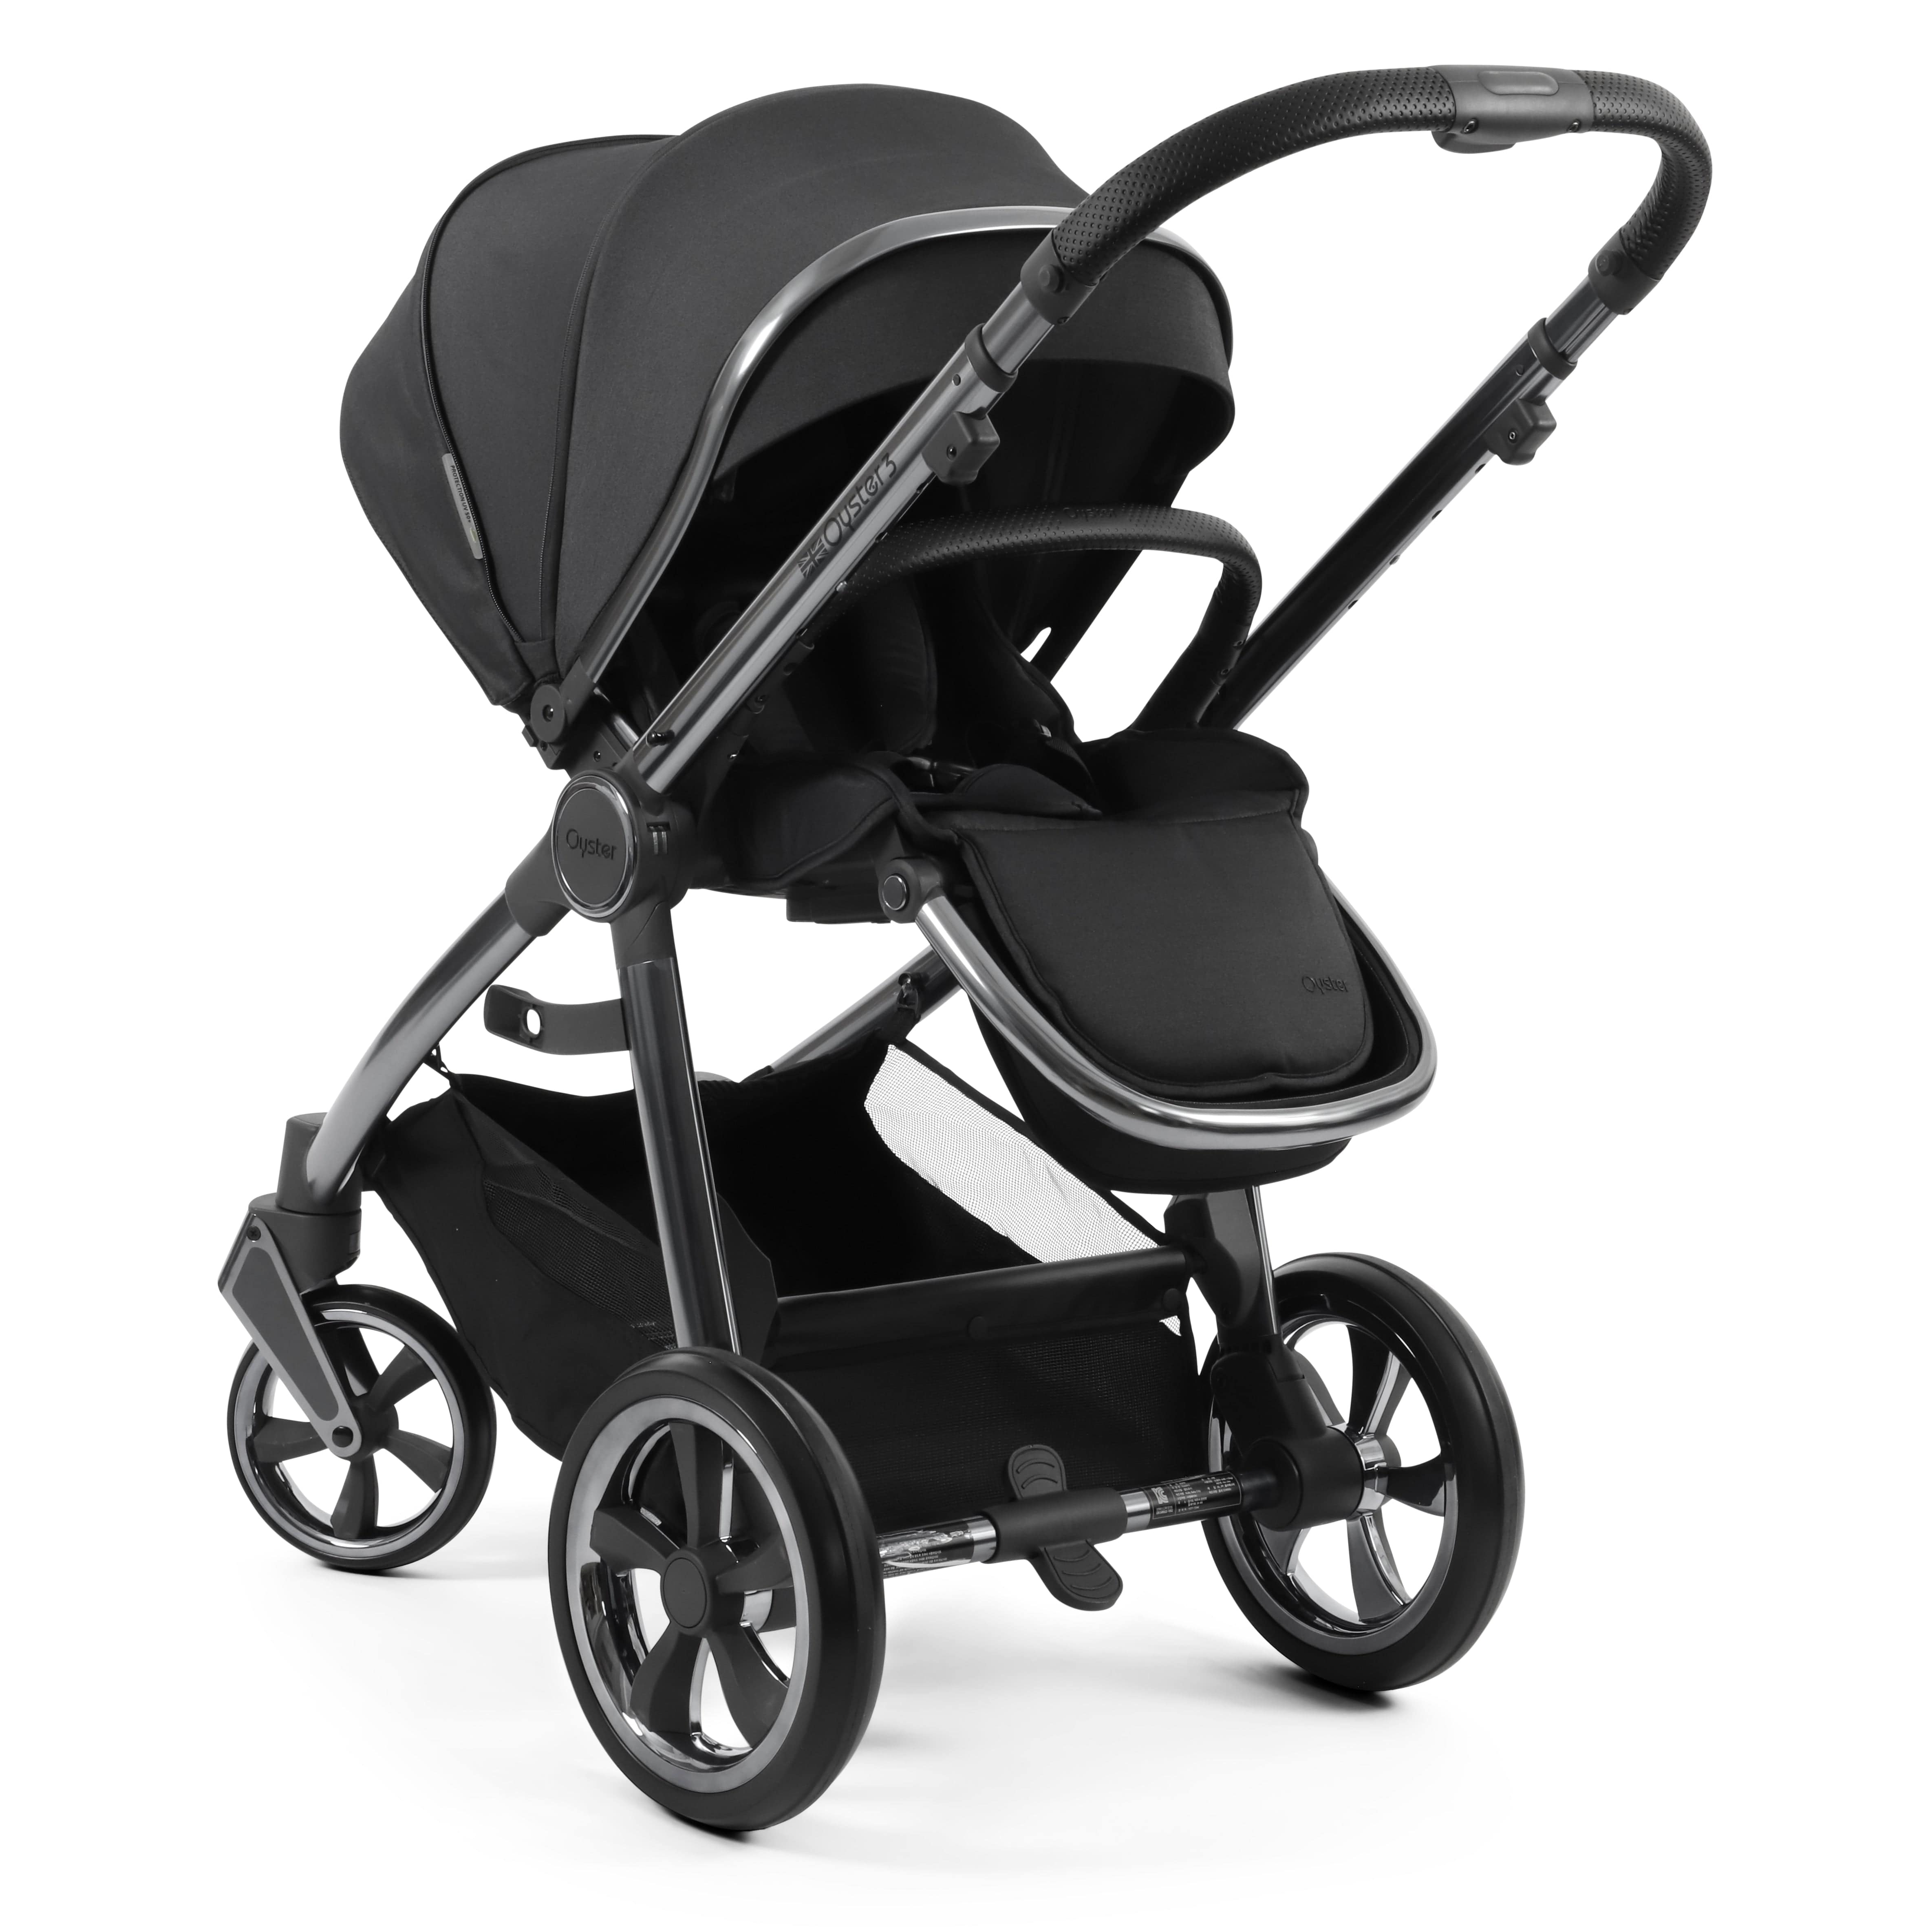 BabyStyle Oyster3 Pram & Carrycot Carbonite Baby Prams 14730-CRB 5060711567242